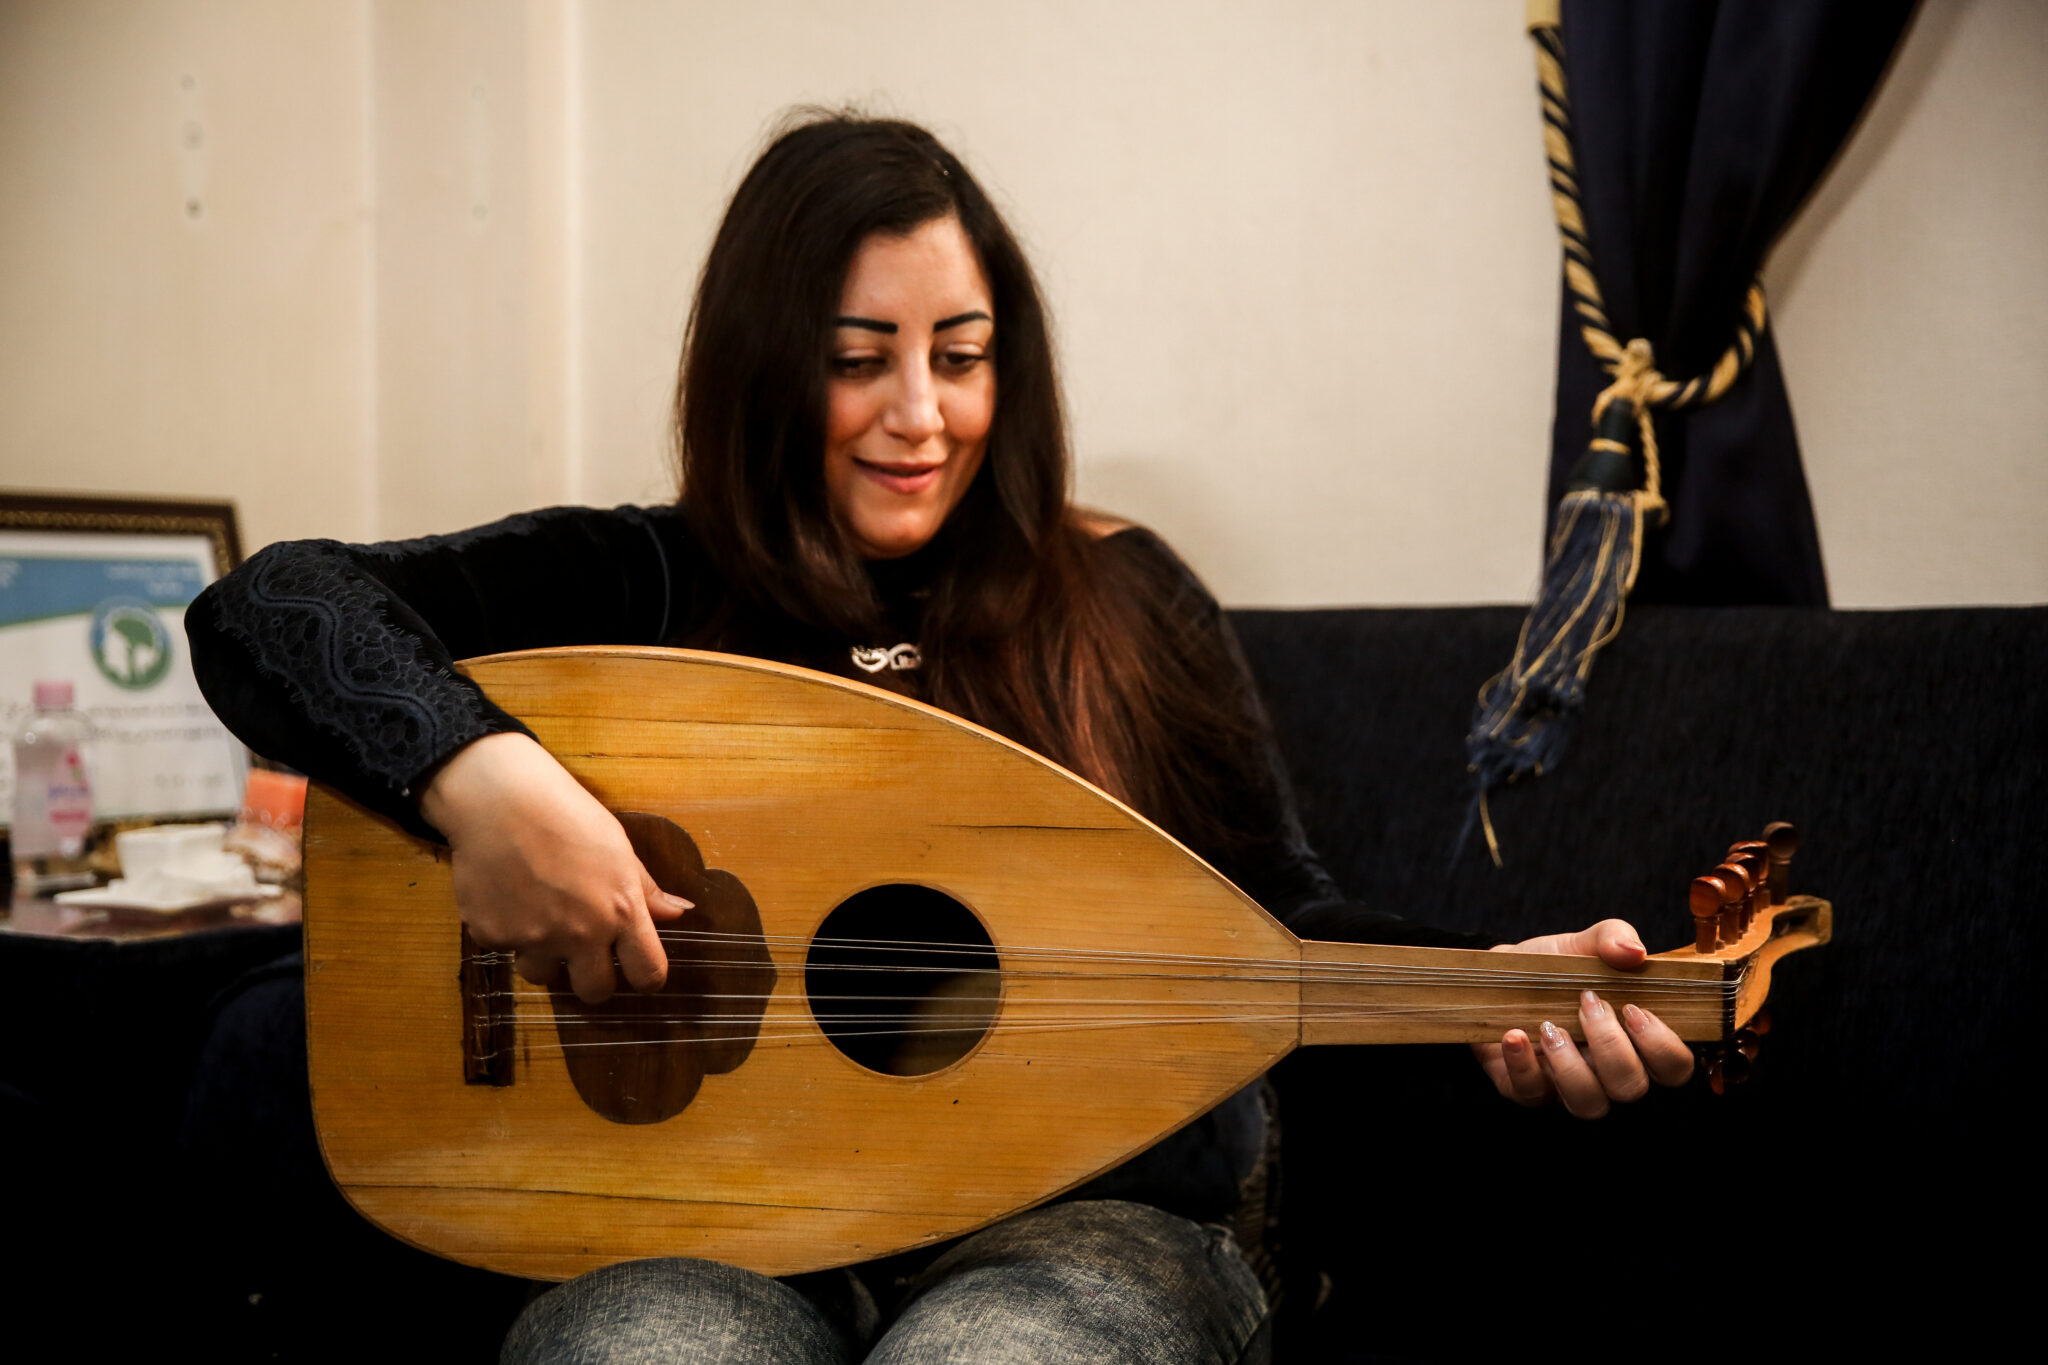 In her spare time, Rola enjoys playing the oud at home, a traditional stringed instrument | AKF / Ali Shaheen